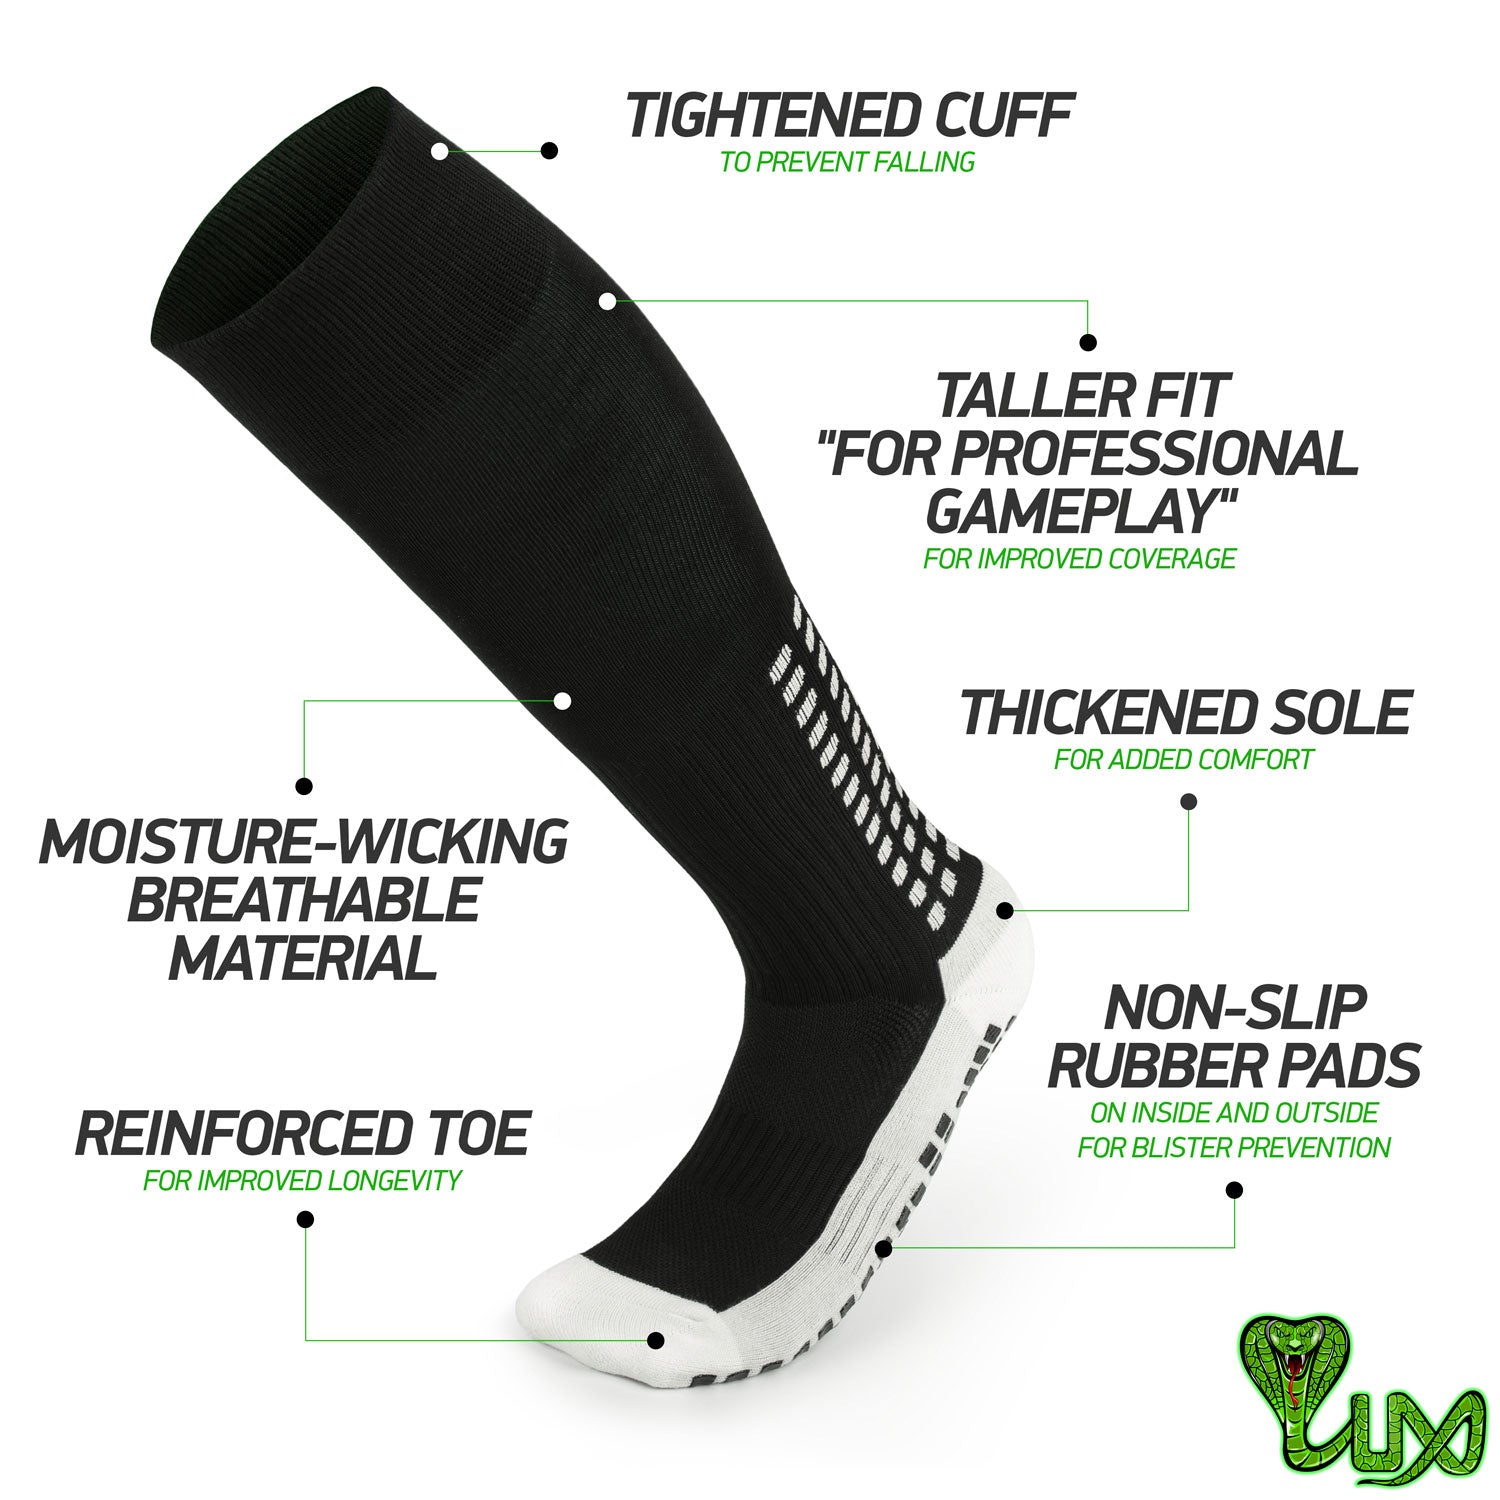 Professional Anti Slip Soccer Knee High Socks For Adults And Kids